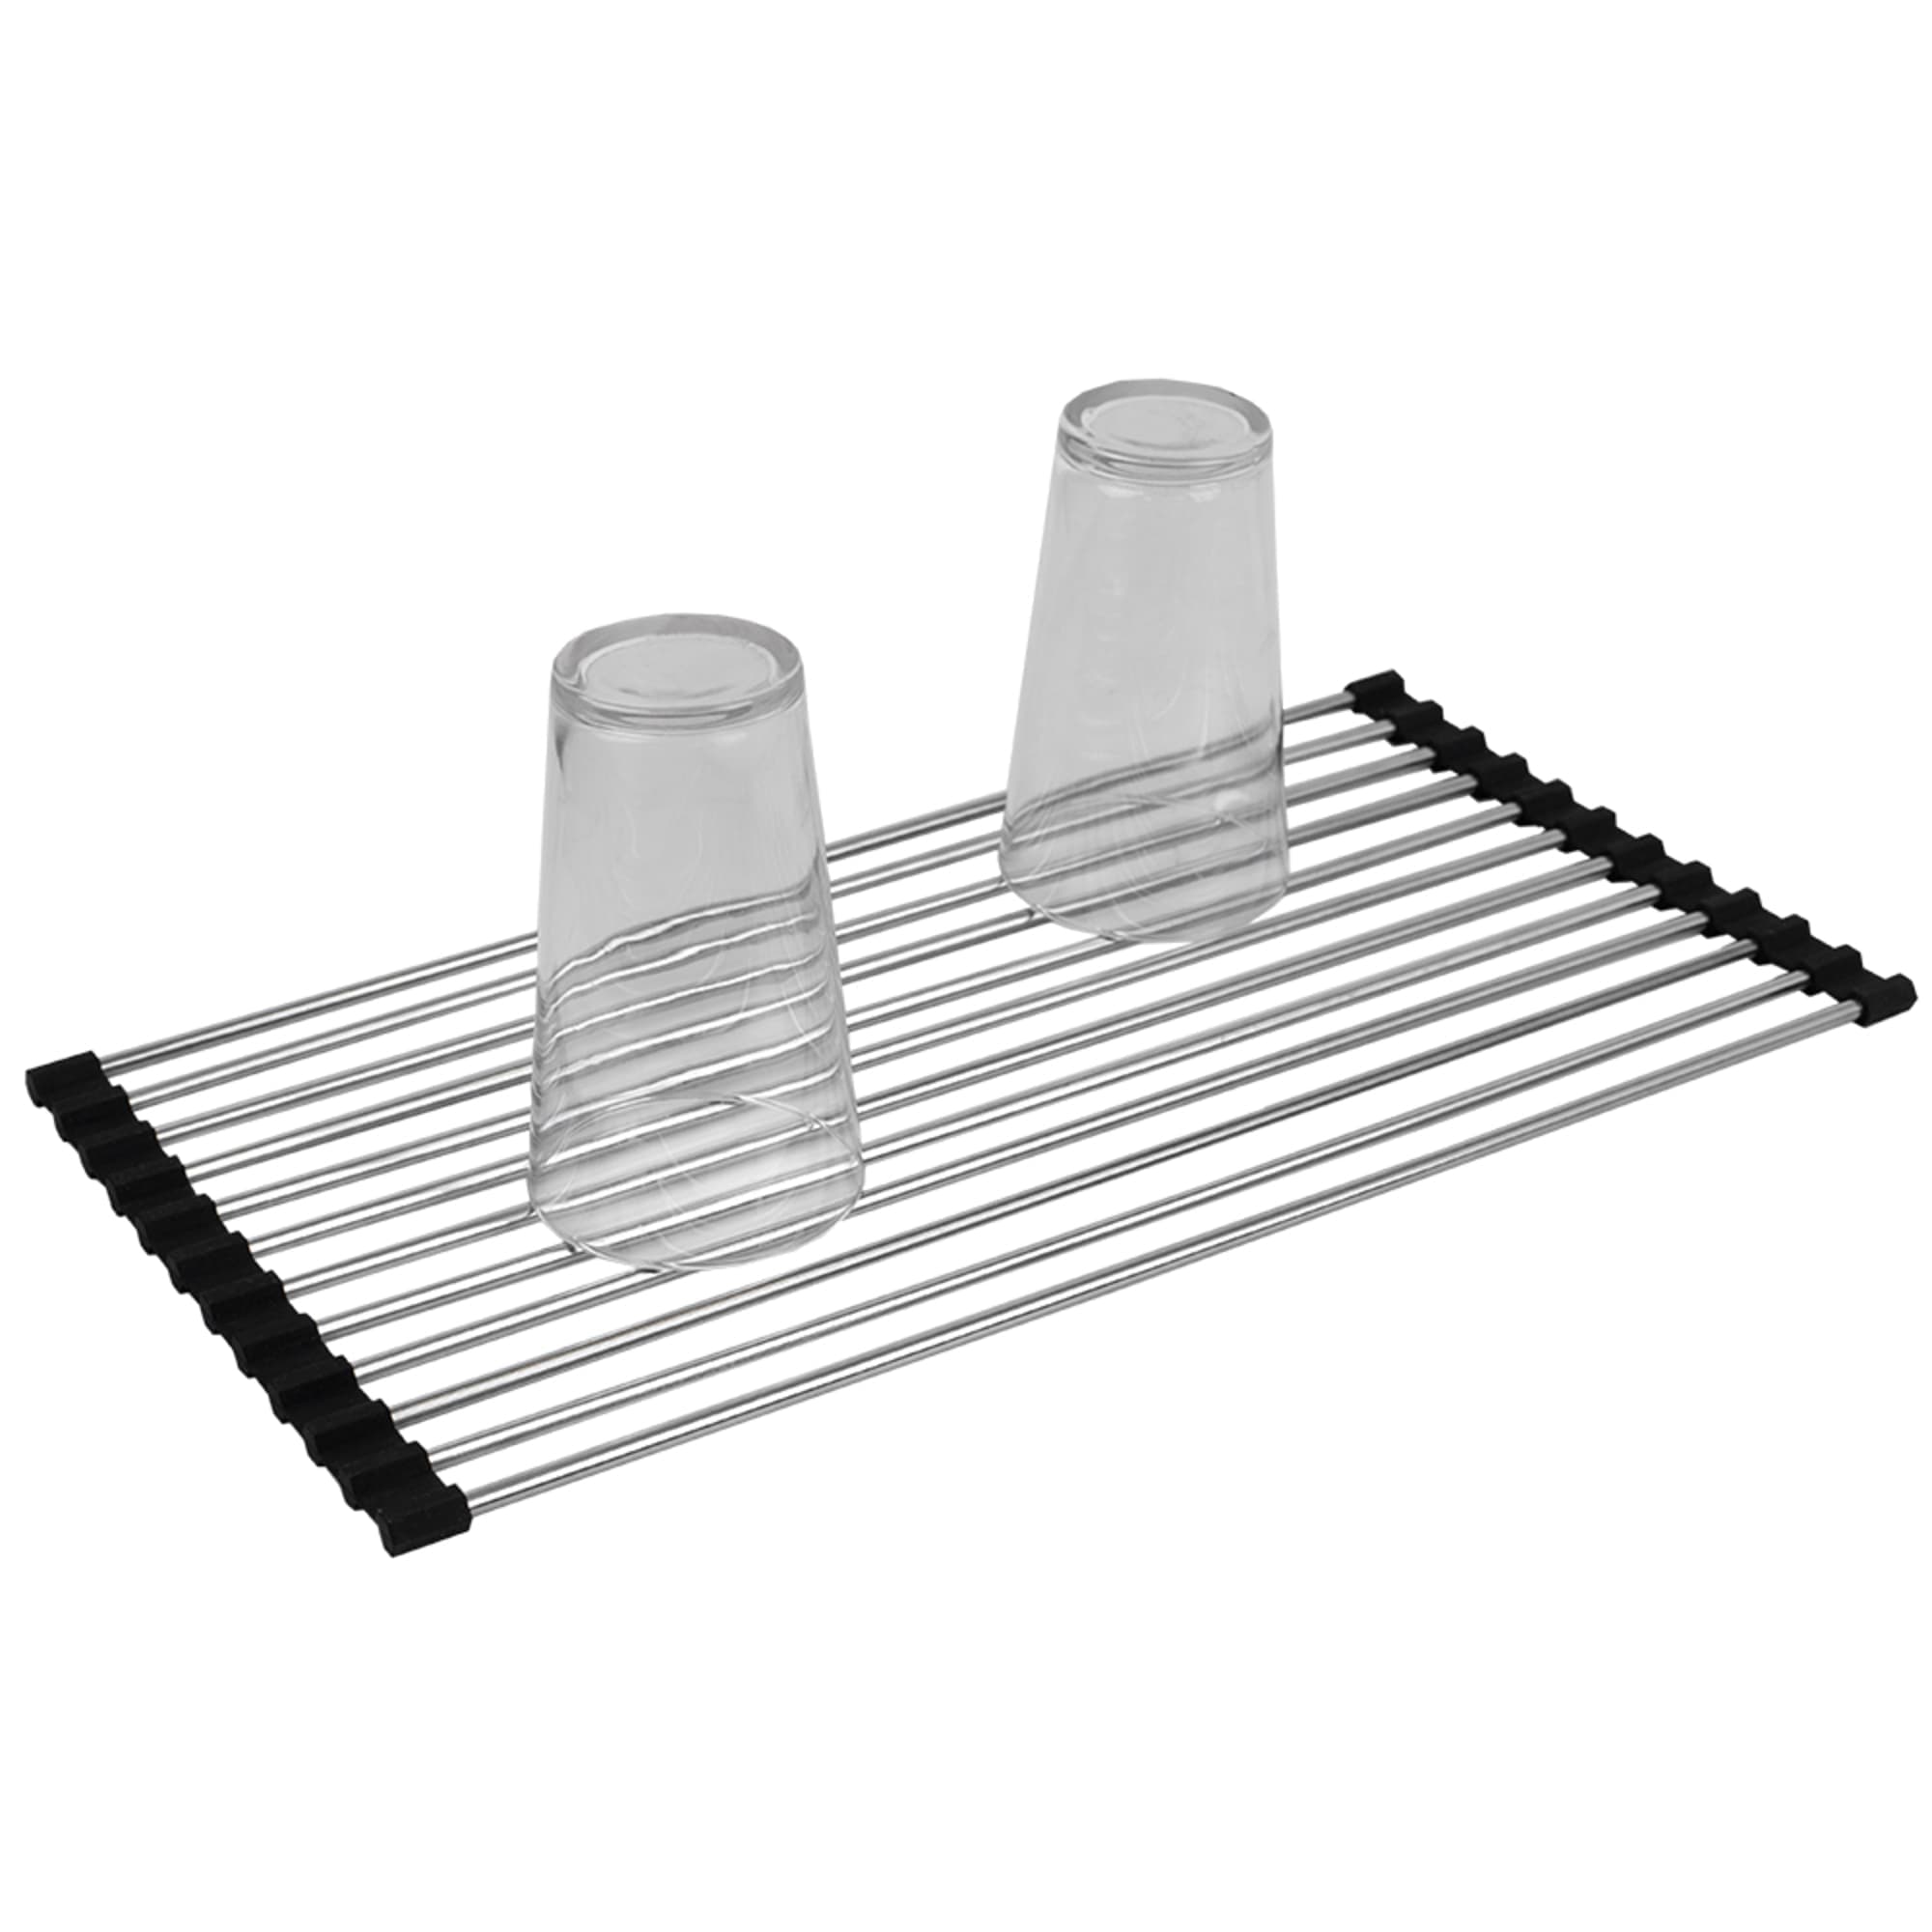 Buy Wholesale China Collapsible Dish Drying Rack Dish Drainer